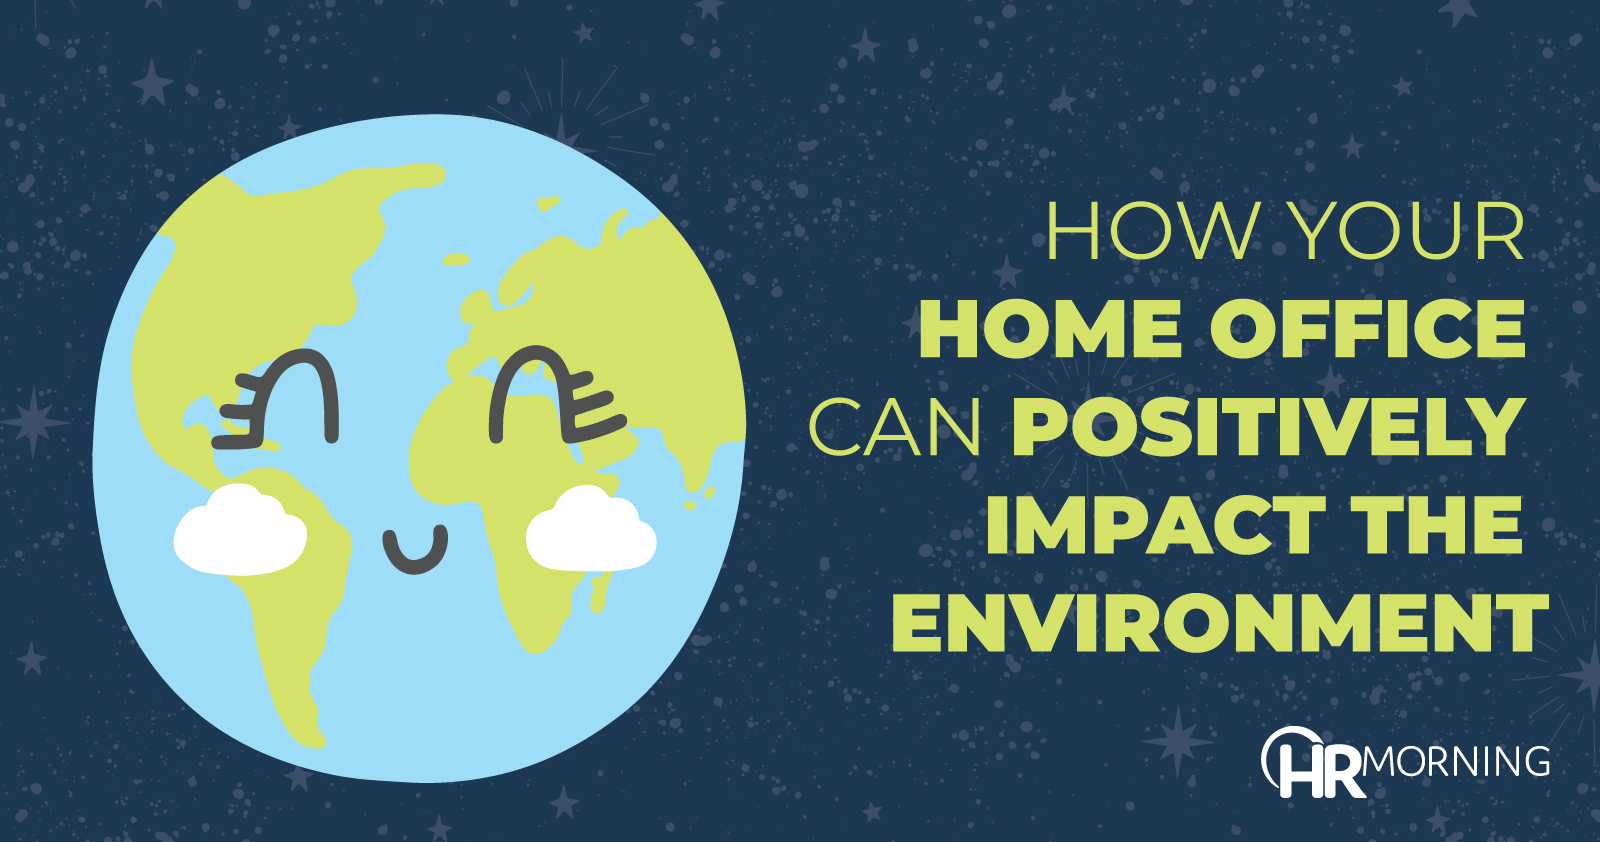 How your home office can positively impact the environment